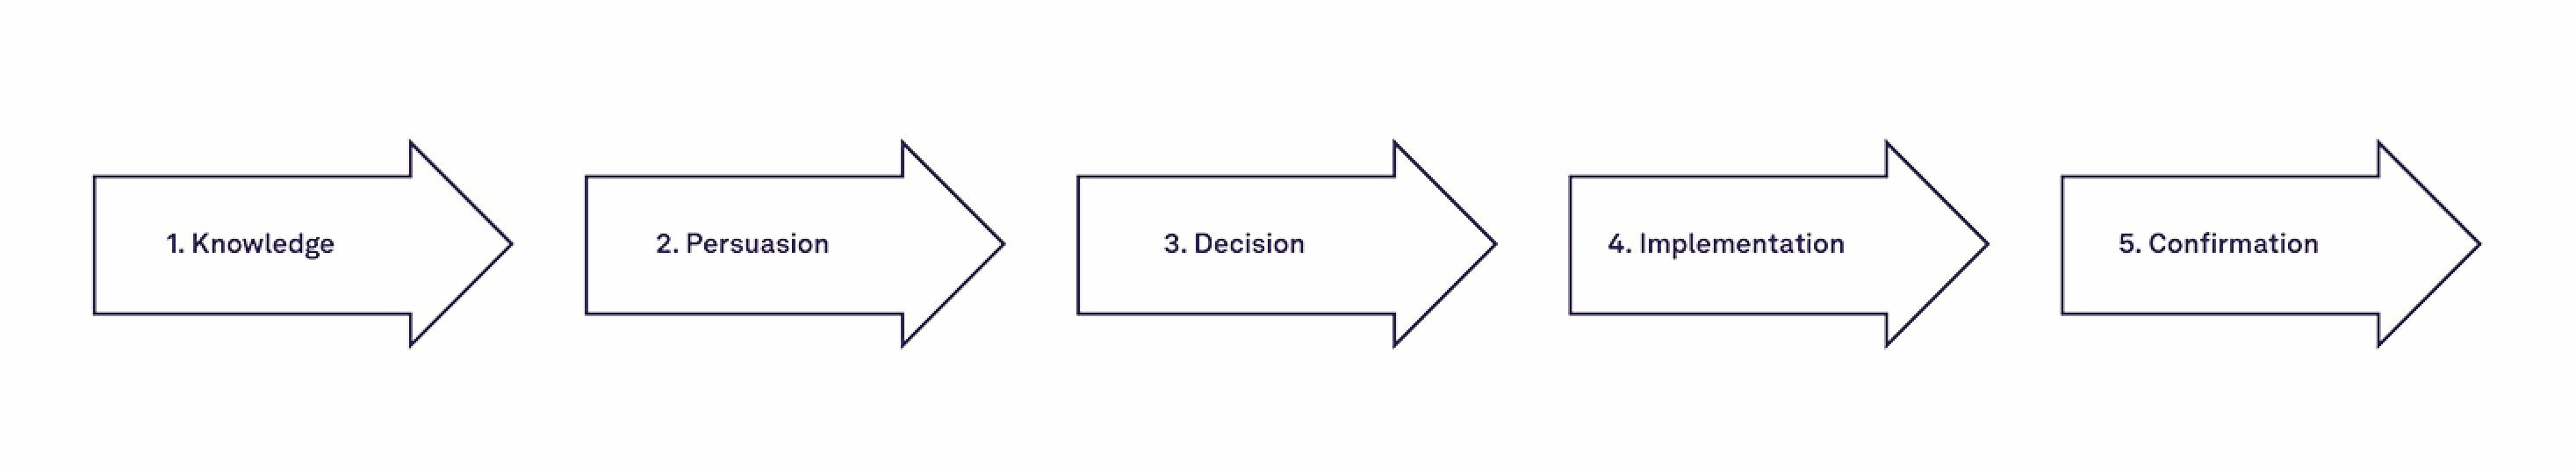 The innovation-decision process for individuals according to Rogers.